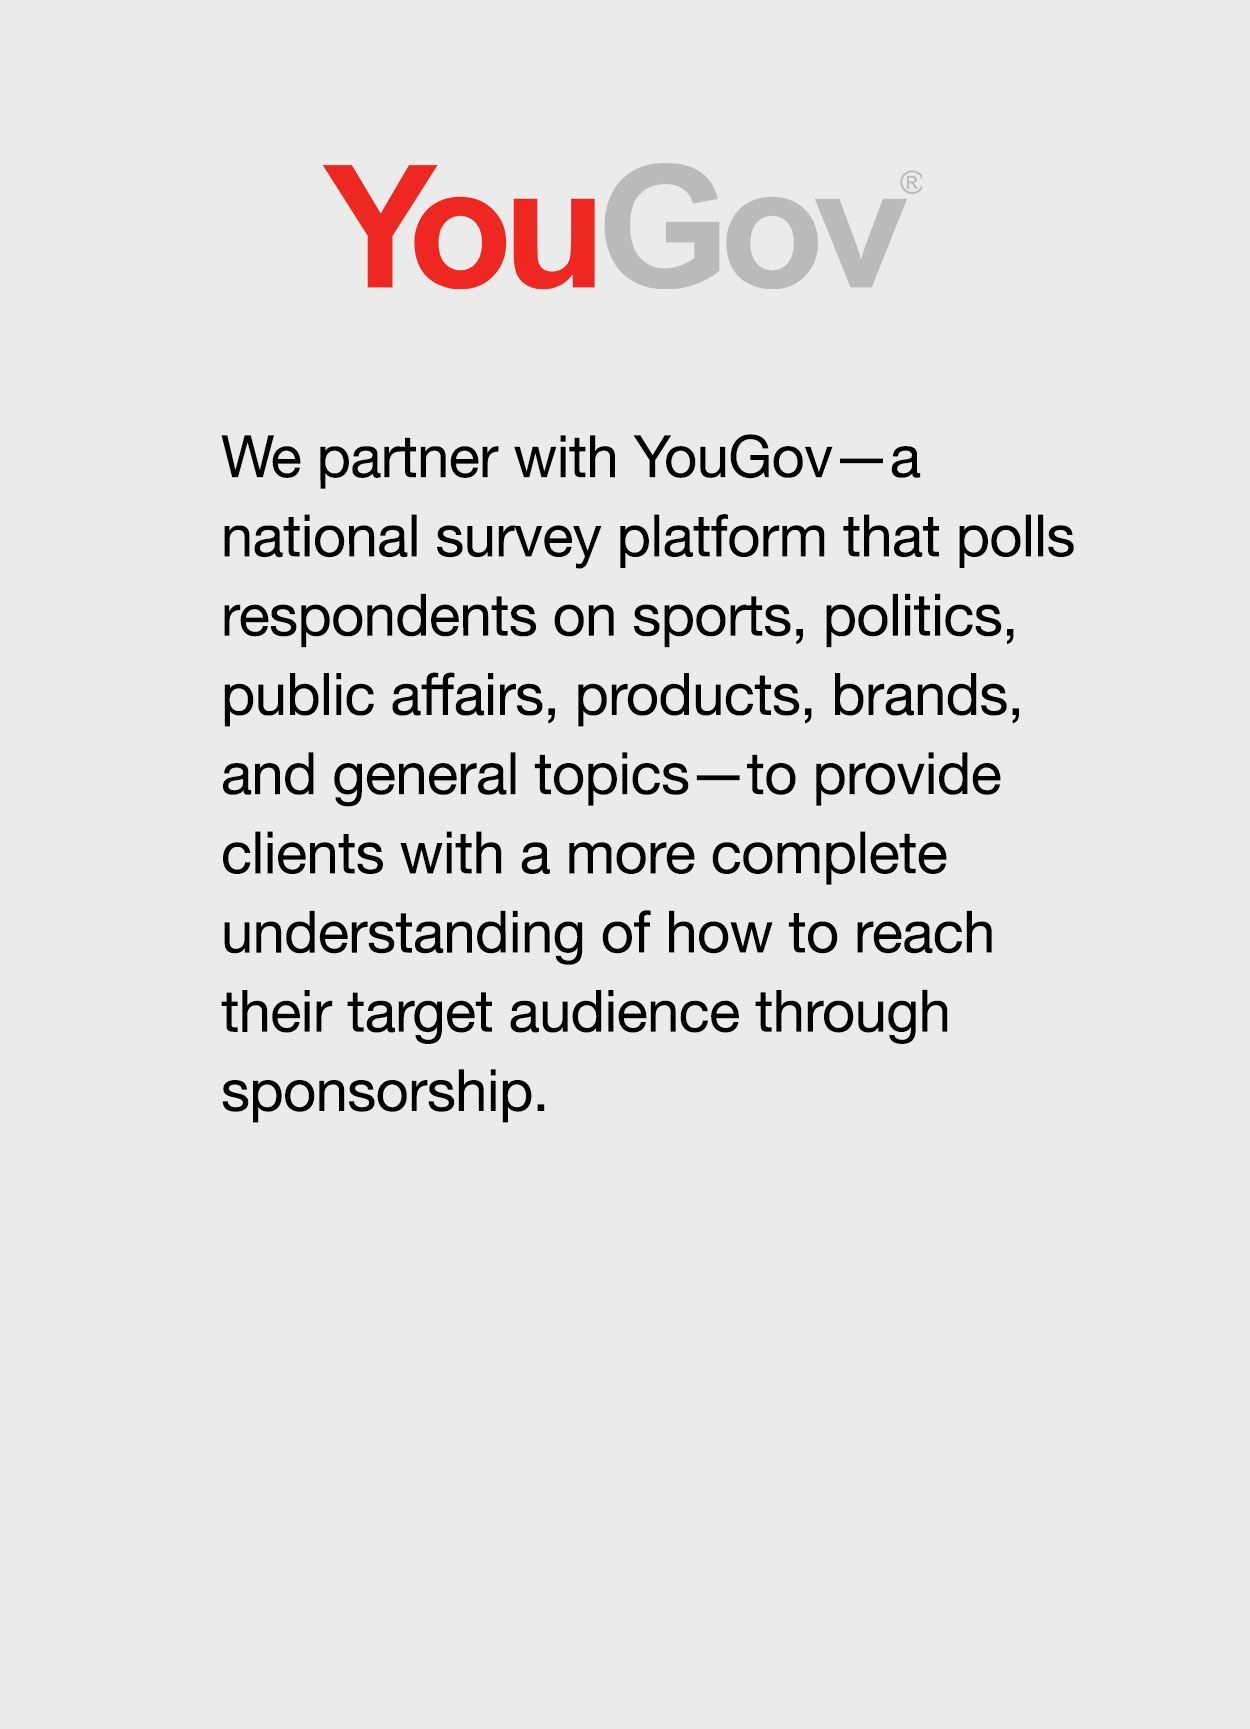 We partner with YouGov—a   national survey platform that polls respondents on sports, politics, public affairs, products, brands,   and general topics—to provide clients with a more complete understanding of how to reach their target audience through sponsorship.